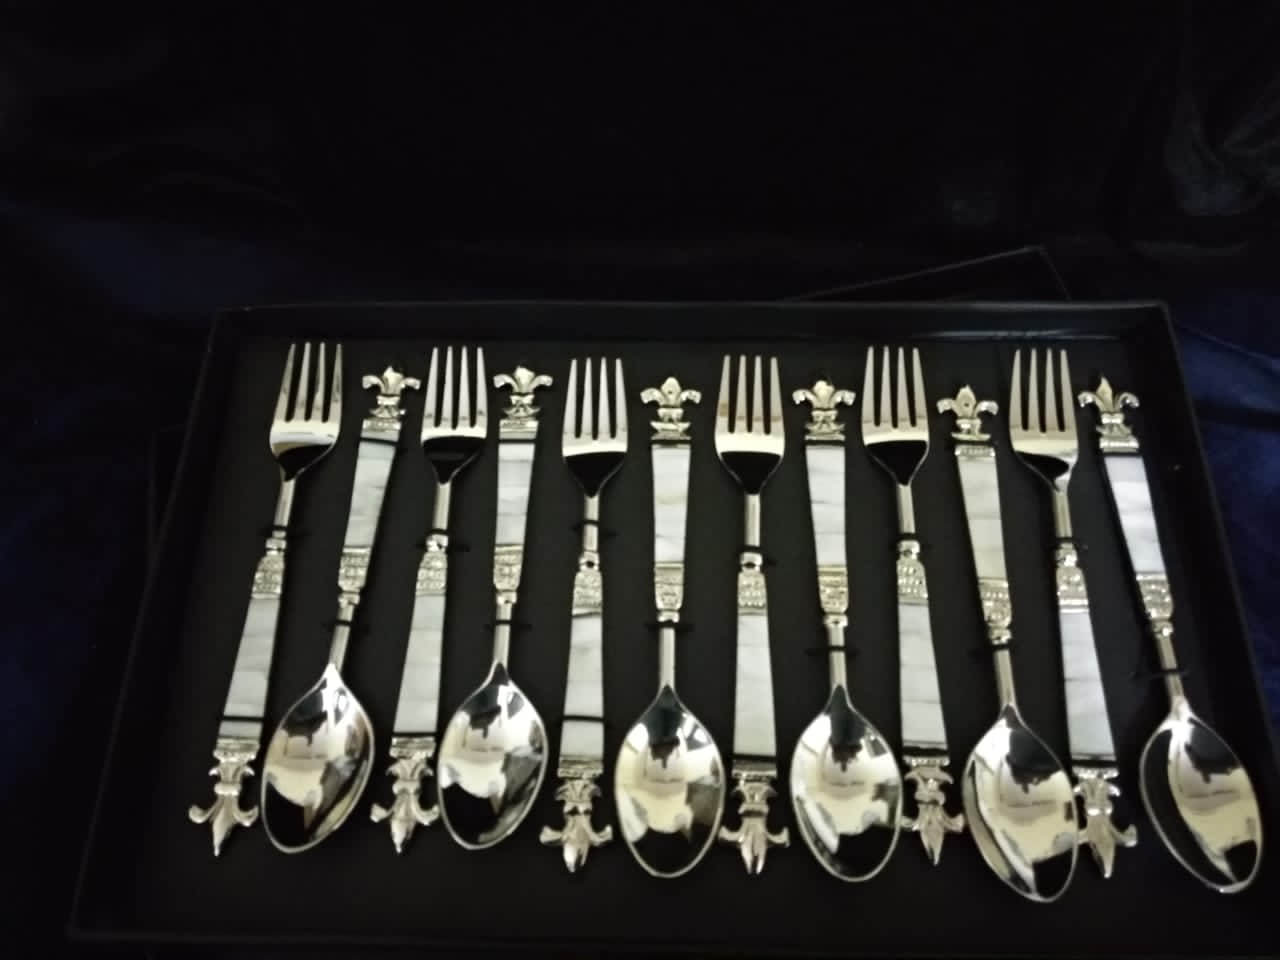 Mother Of Pearl Flower Design Stainless Steel Dinner Spoons Set Of 12 pcs